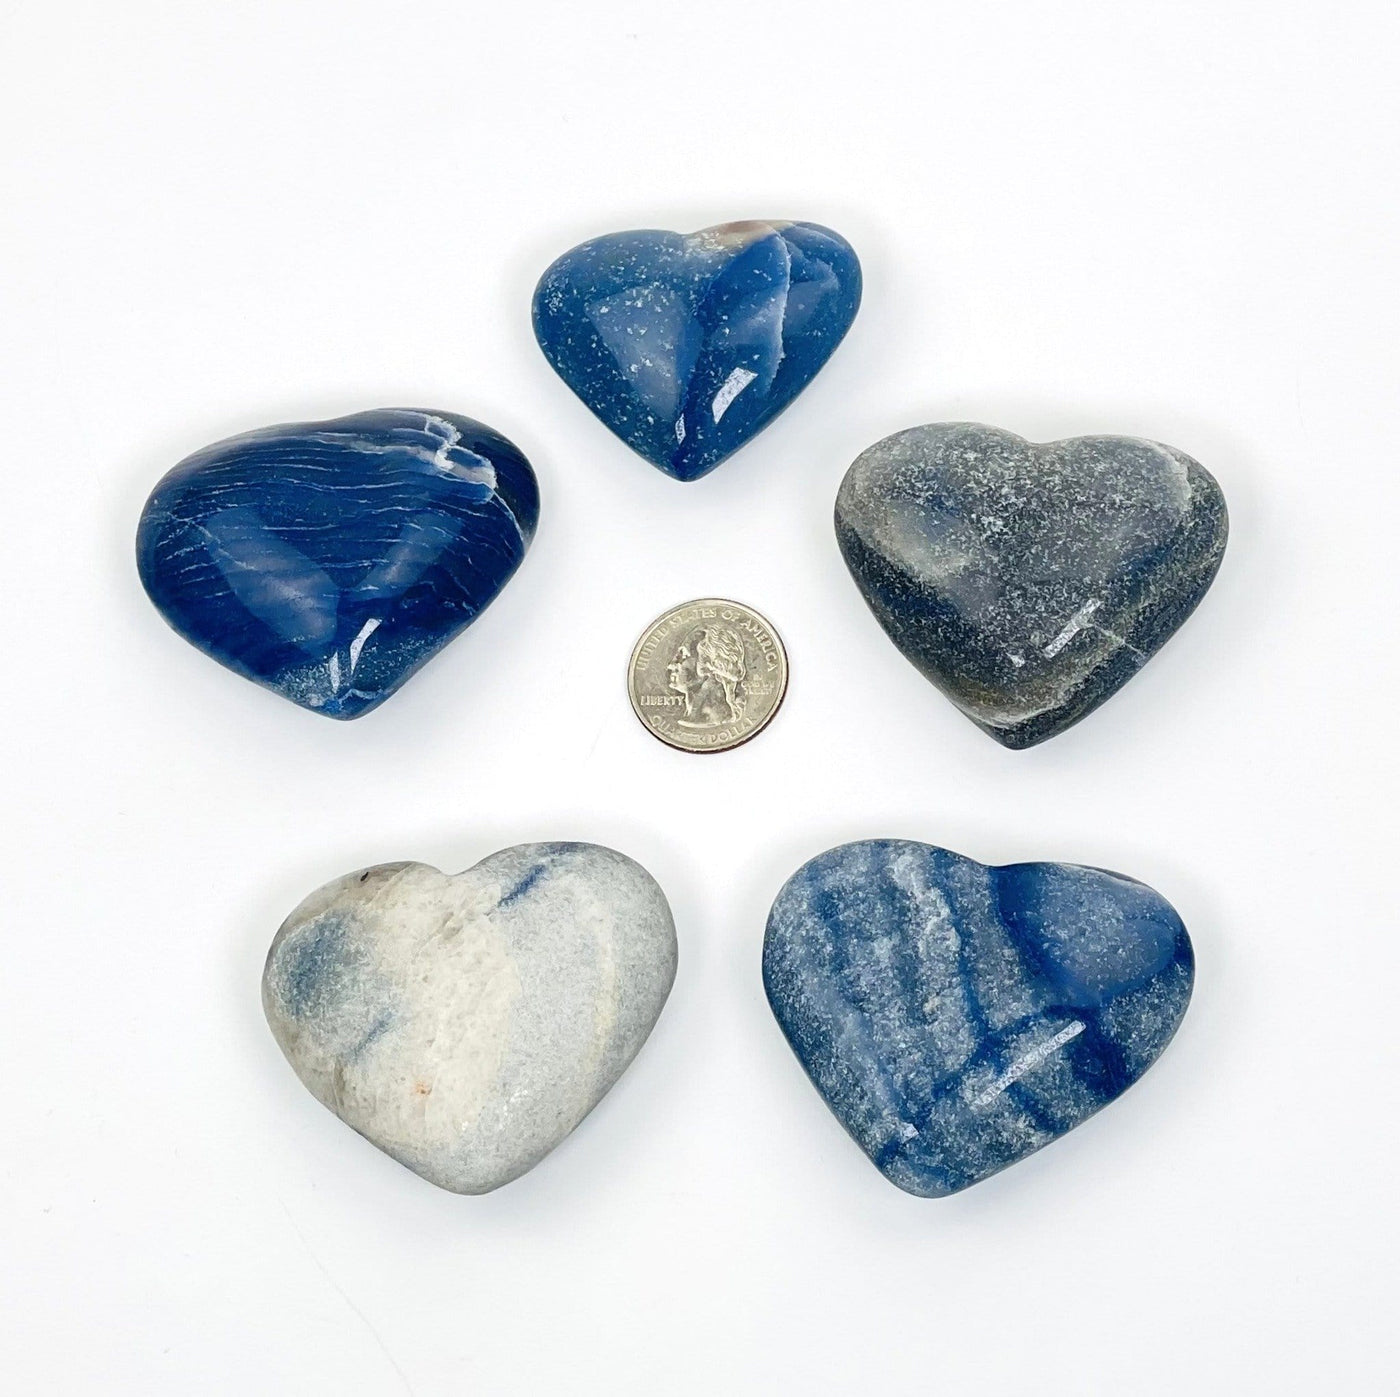 Blue Quartz Hearts - 5 in a circle with a quarter in the middle